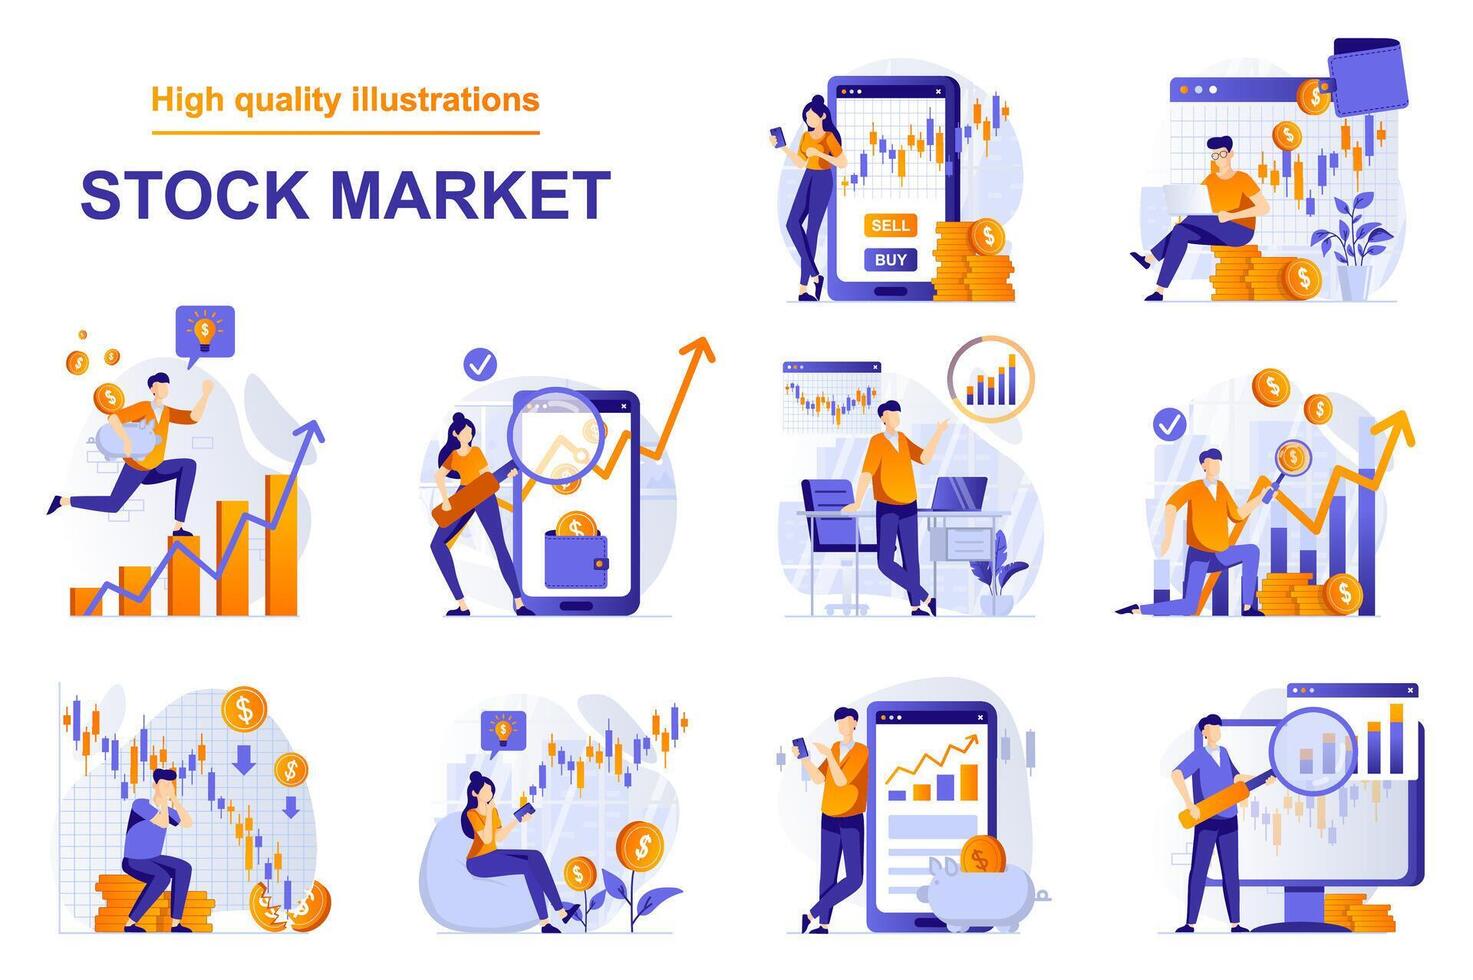 Stock market web concept with people scenes set in flat style. Bundle of analyzing market data, stock trading, buying and selling bonds, financial investment. illustration with character design vector